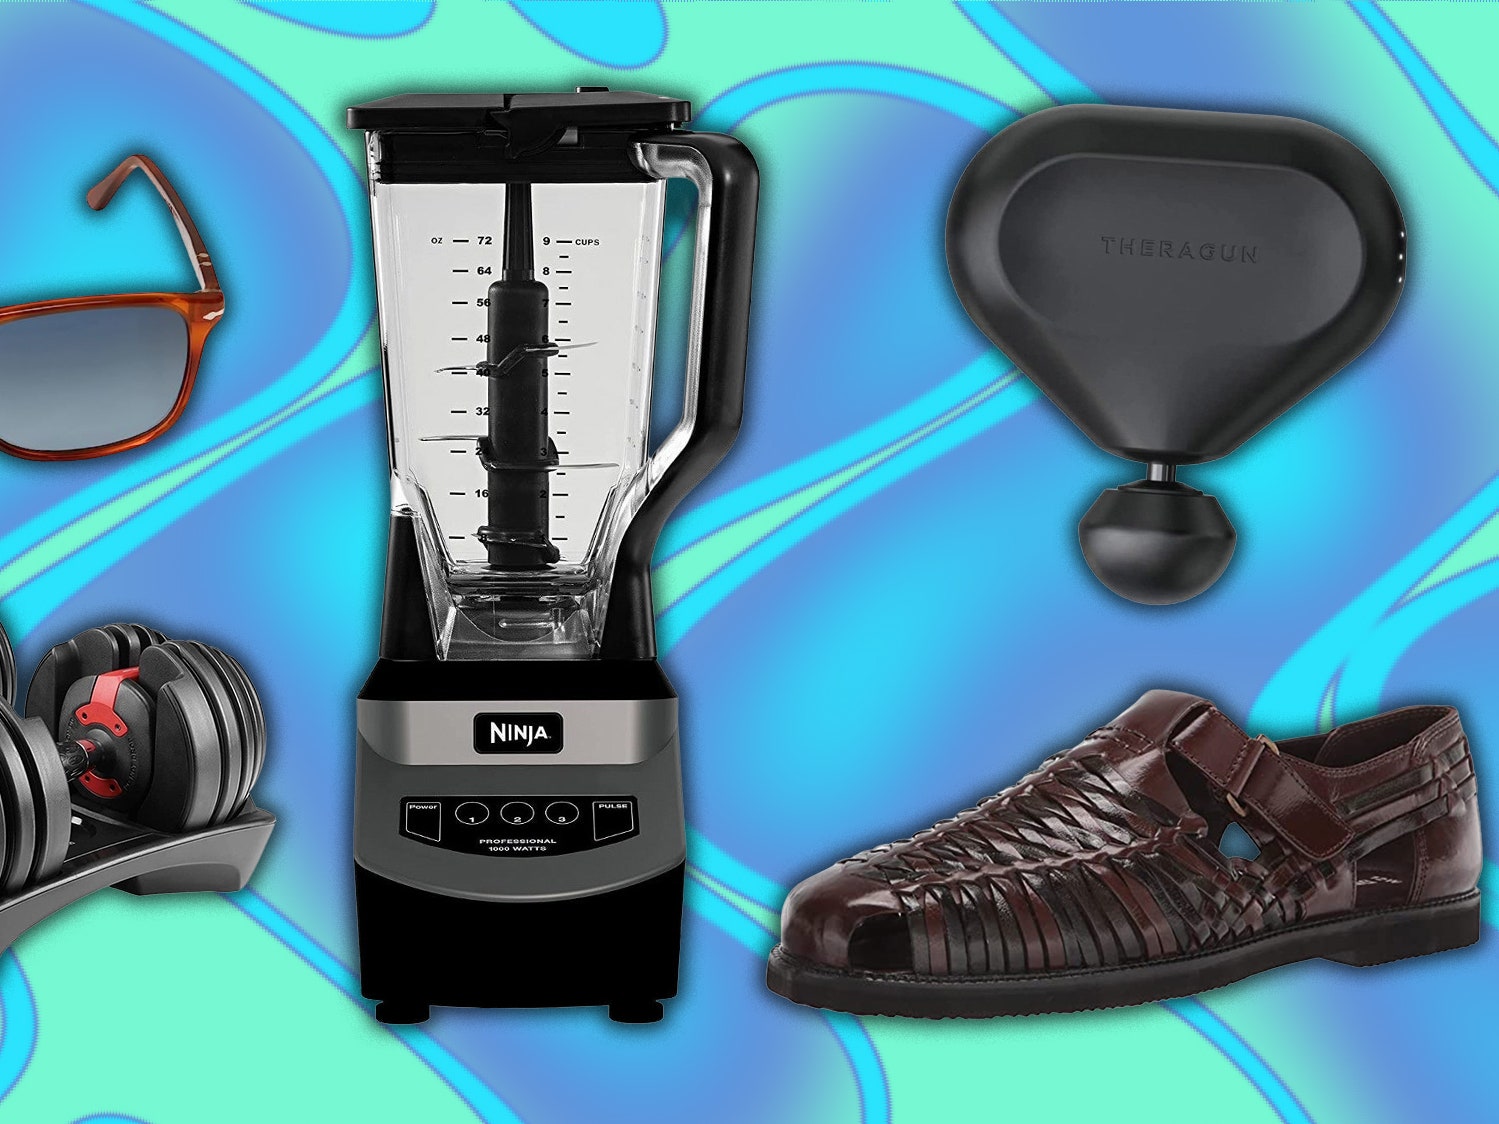 The Best Early Prime Day Deals So Far